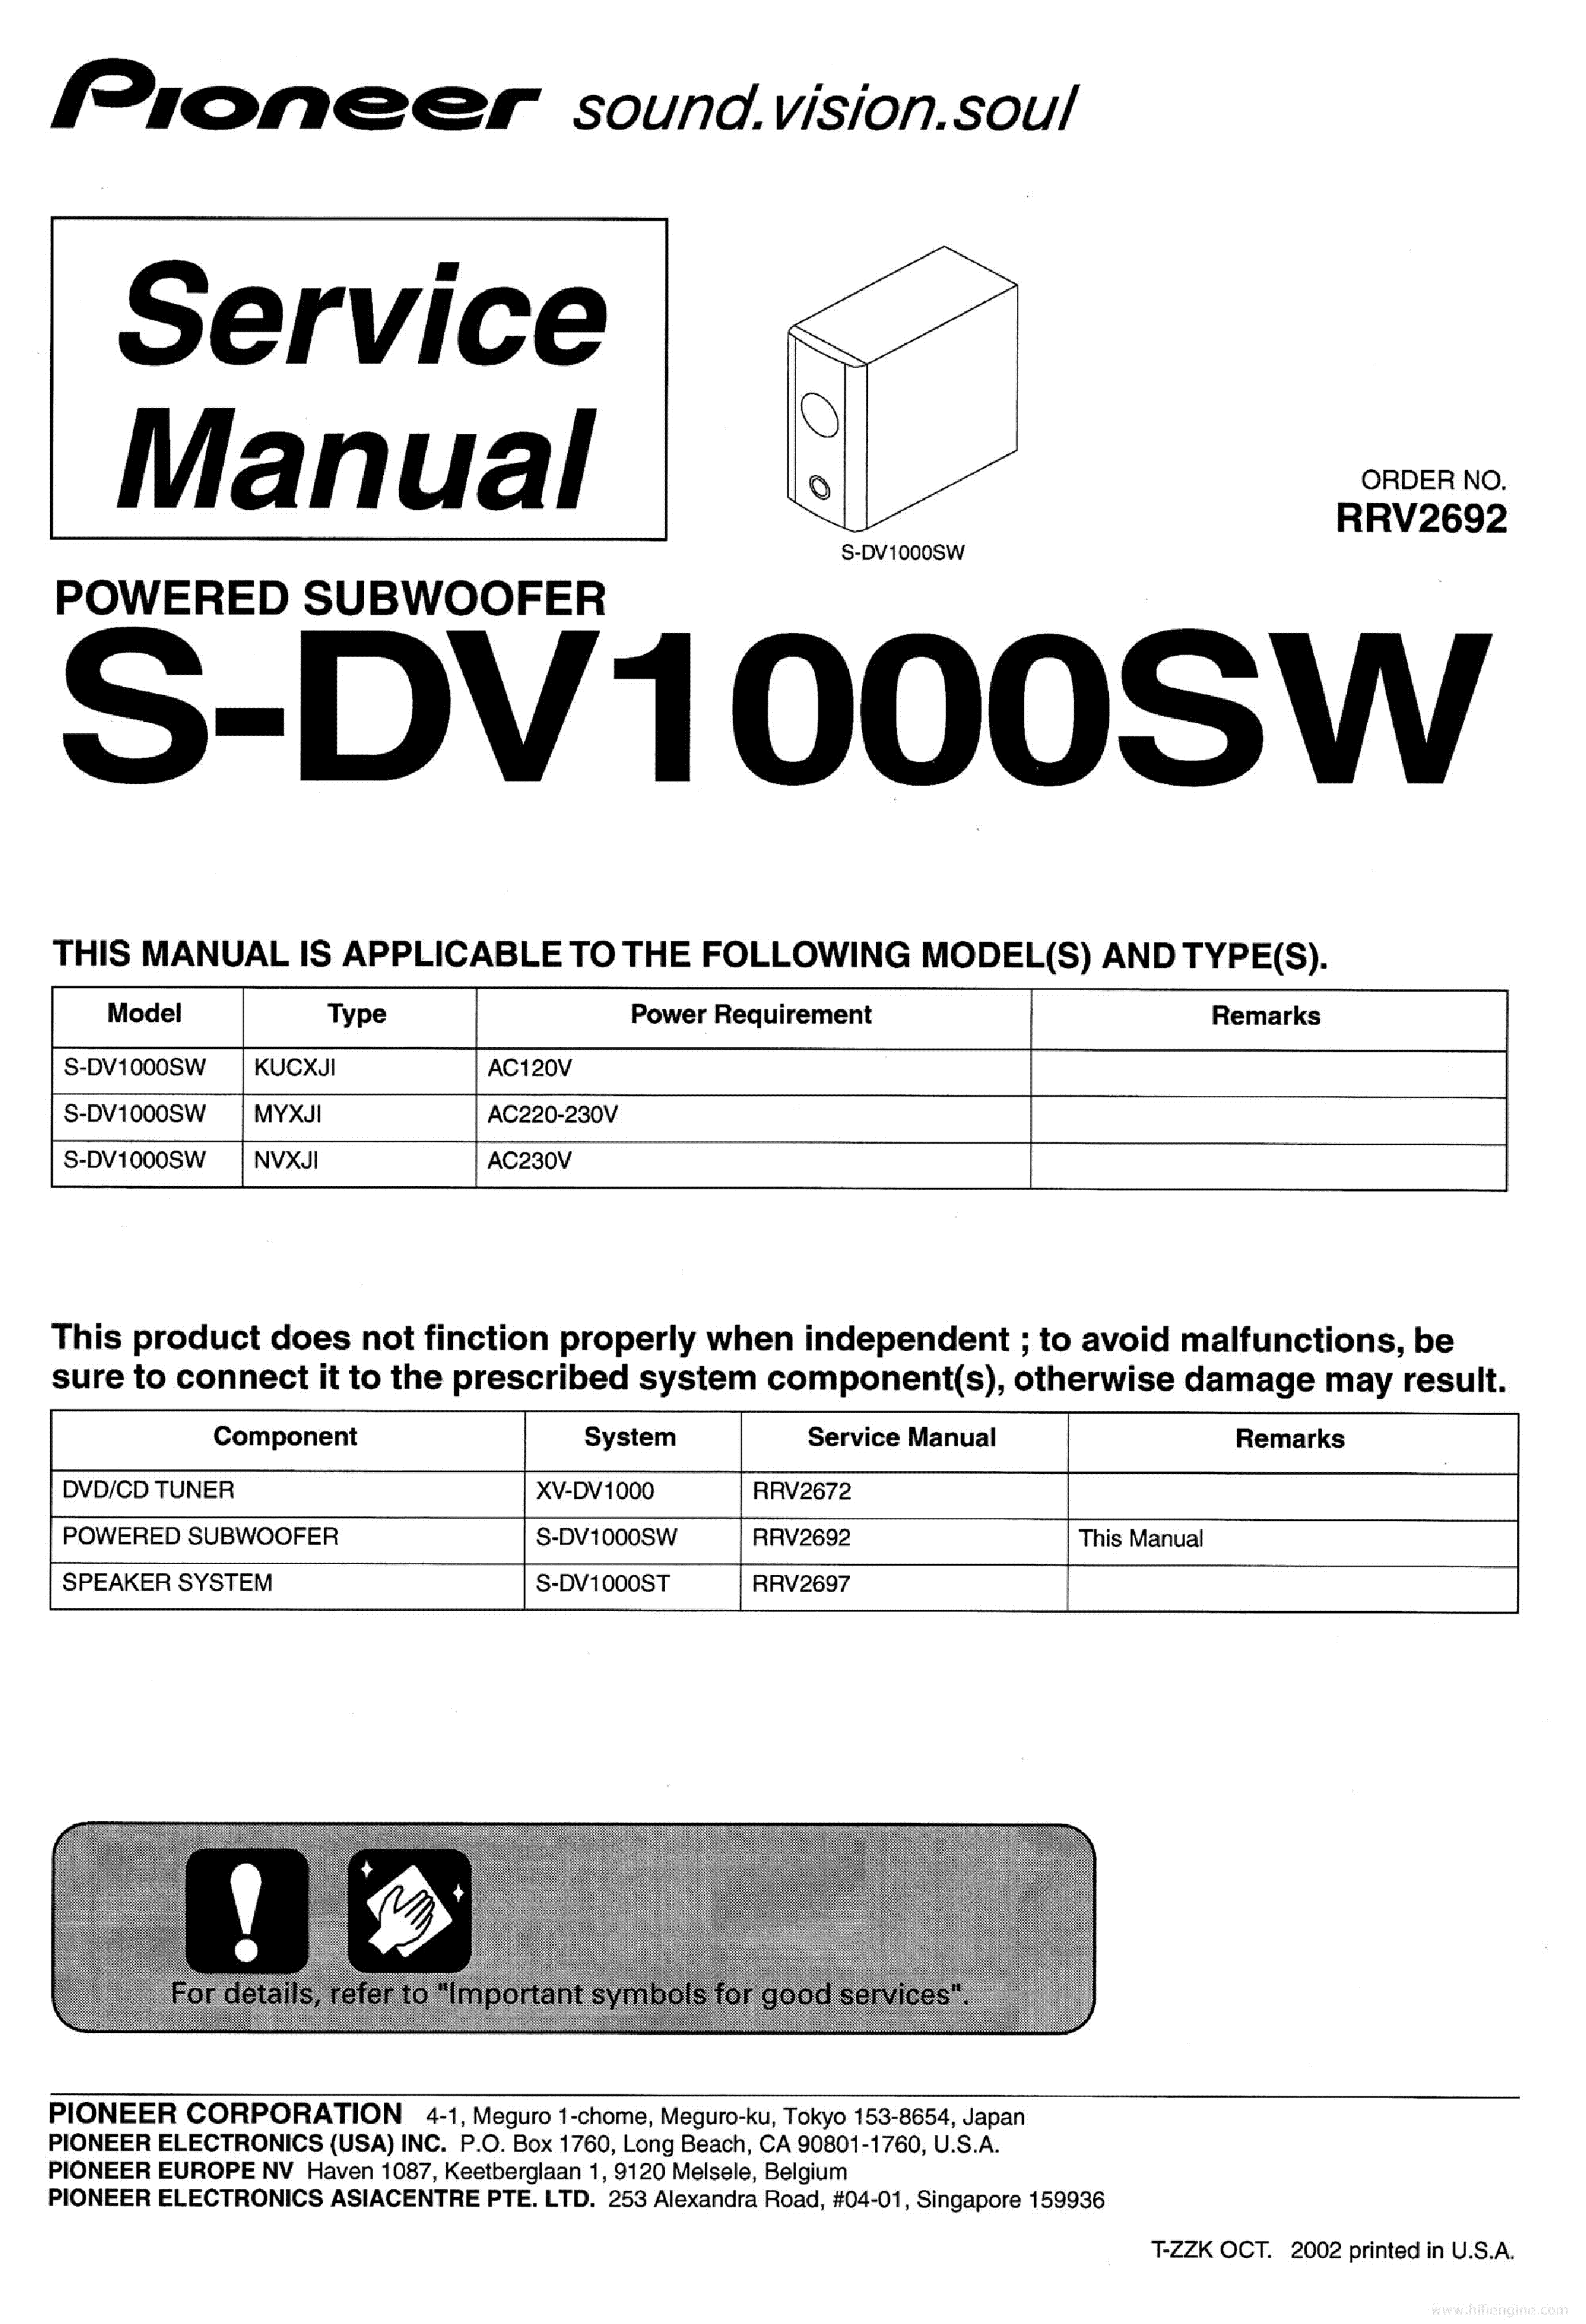 PIONEER S-DV1000SW RRV2692 service manual (1st page)